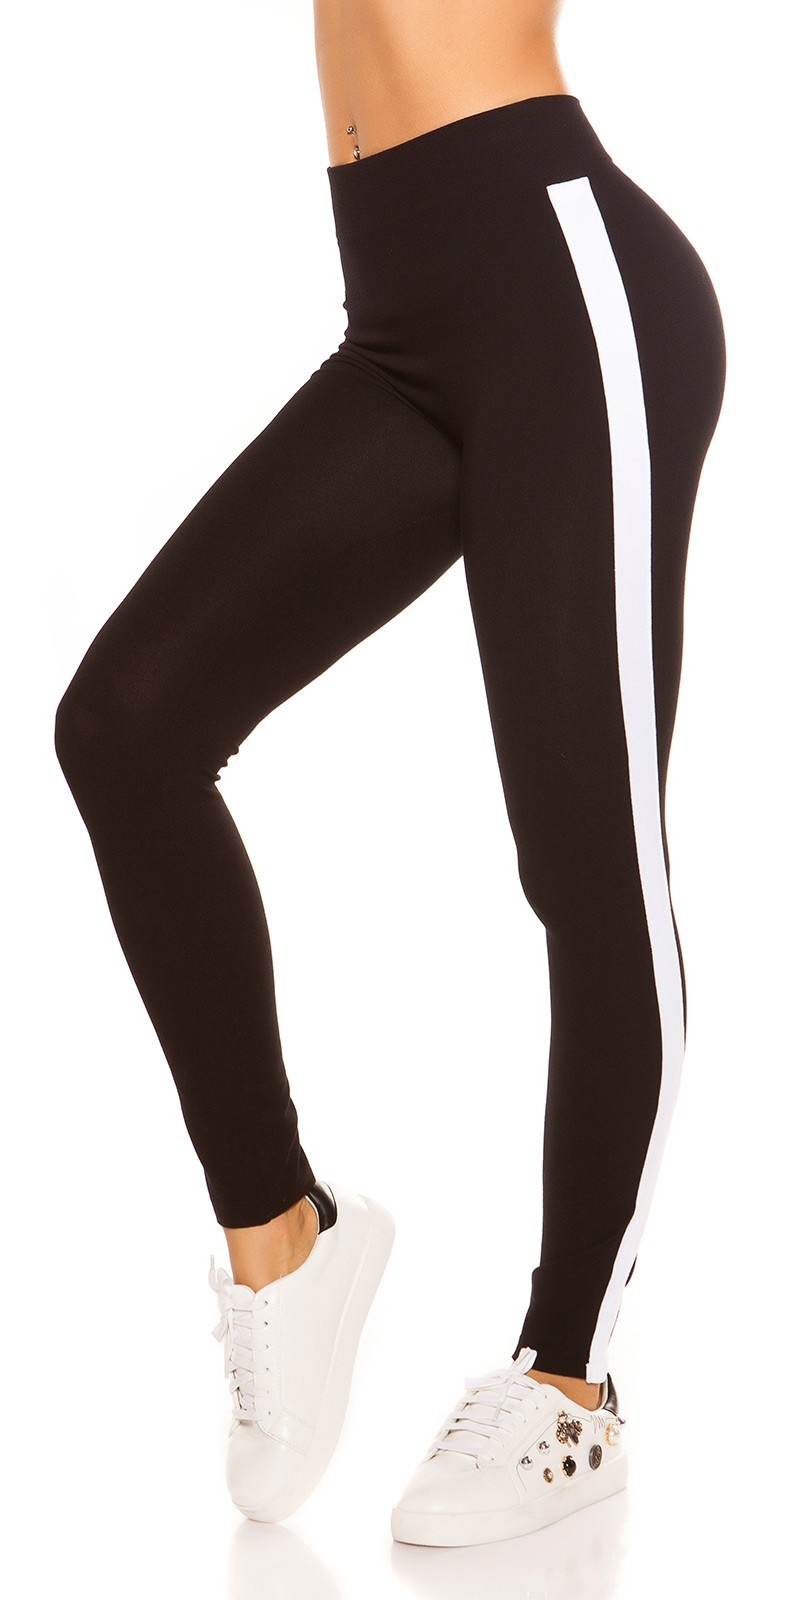 leggings with contrast stripes White 